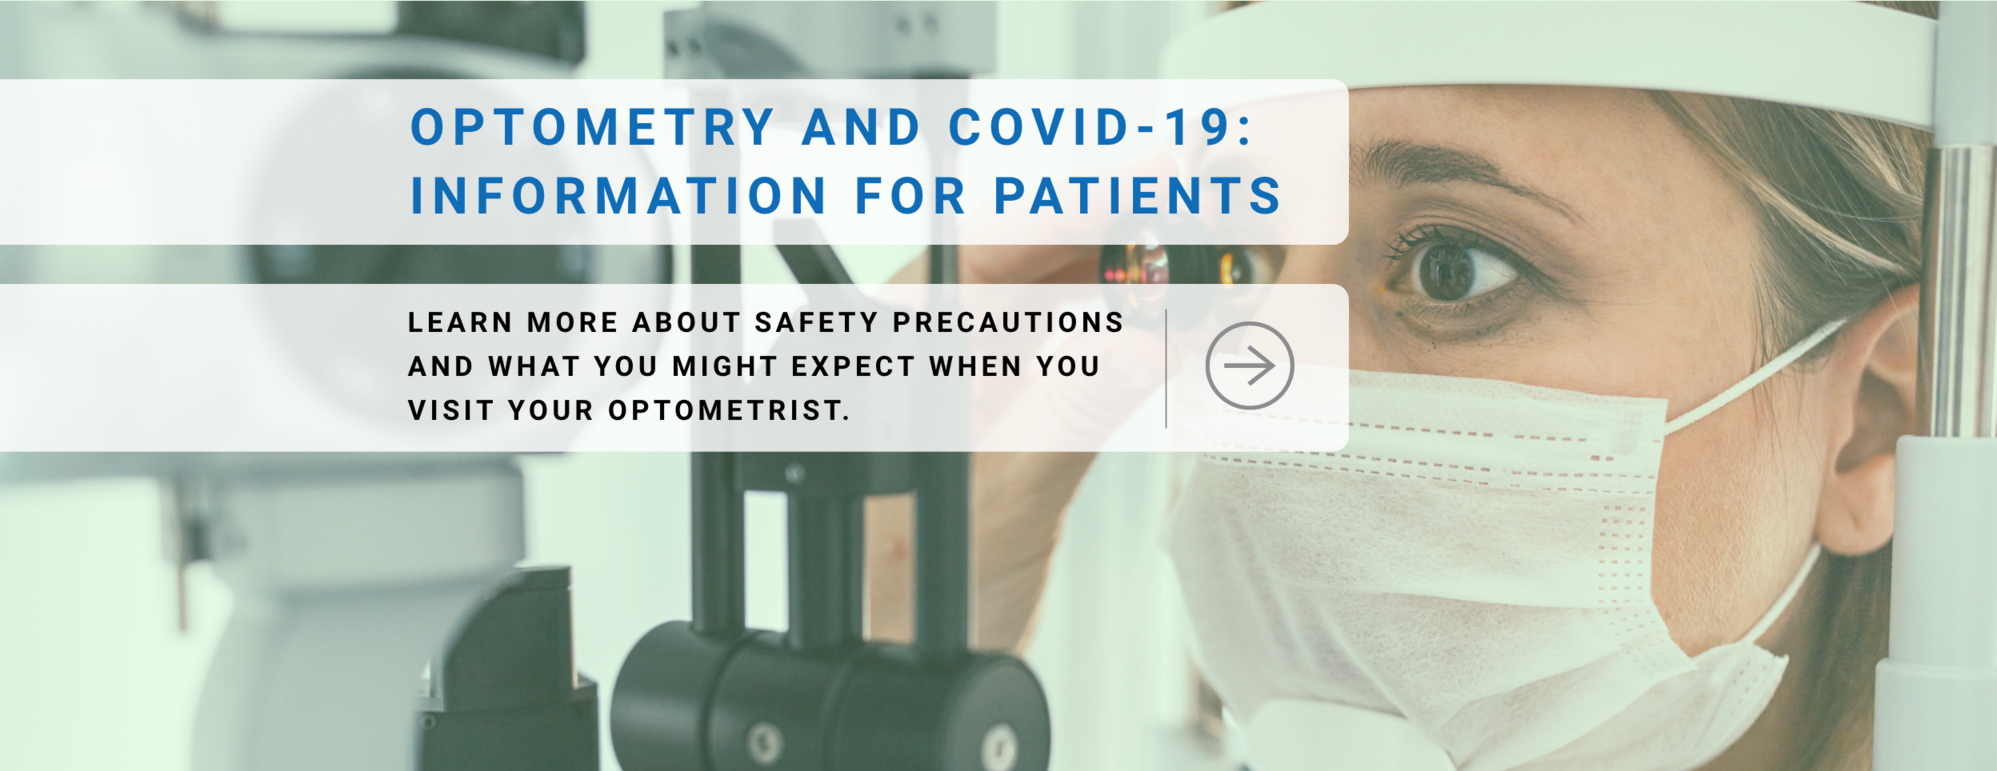 Optometry and COVID-19: information for patients. Learn more about safety precautions and what you might expect when you visit your optometrist.